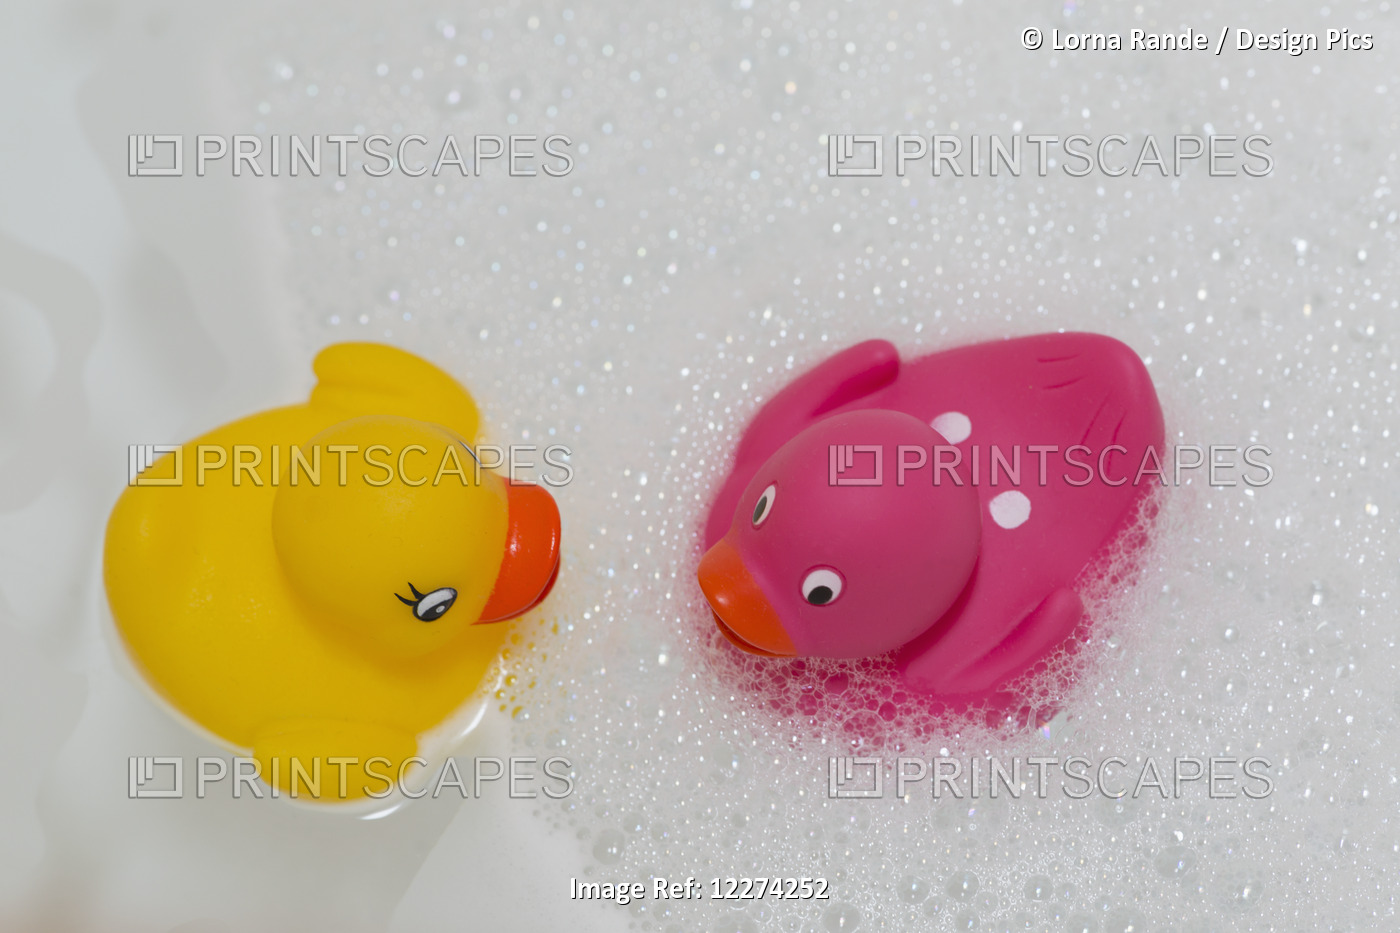 Rubber Ducks Facing Each Other In A Bubble Bath; Chilliwack, British Columbia, ...